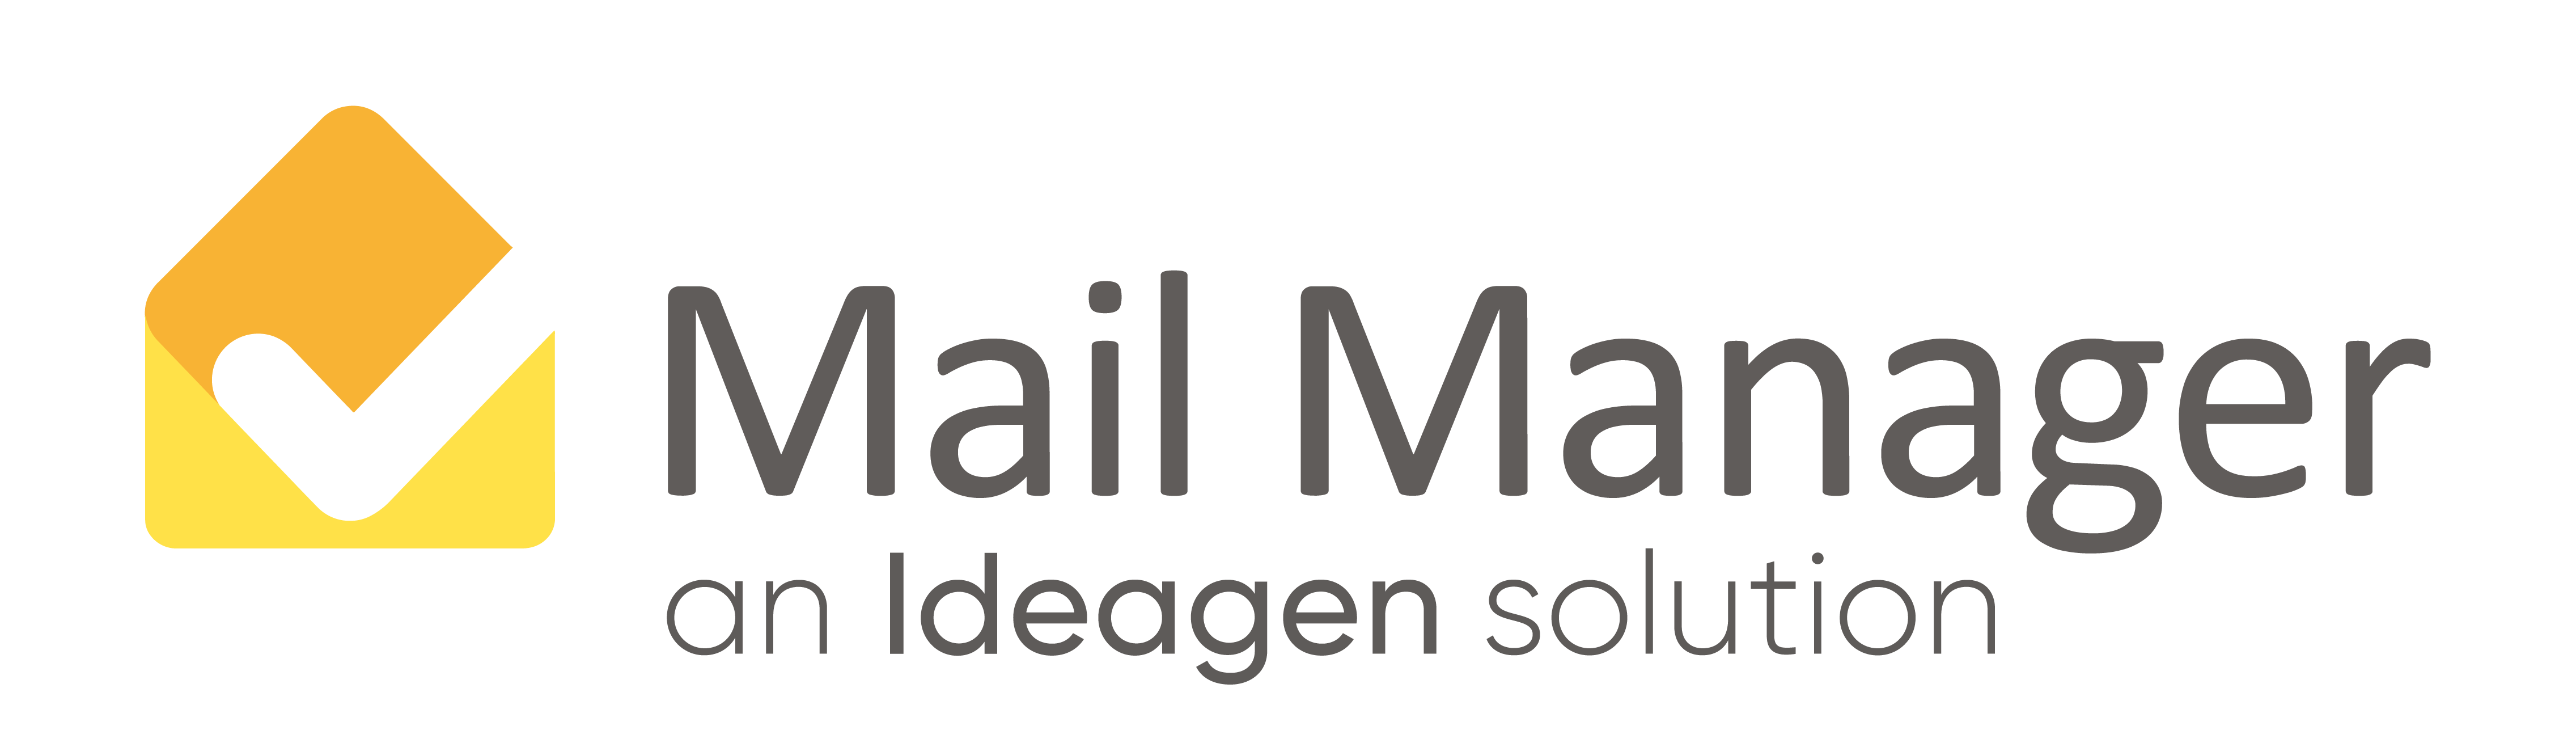 Mail Manager logo-vertical-IdeagenSolution_-01